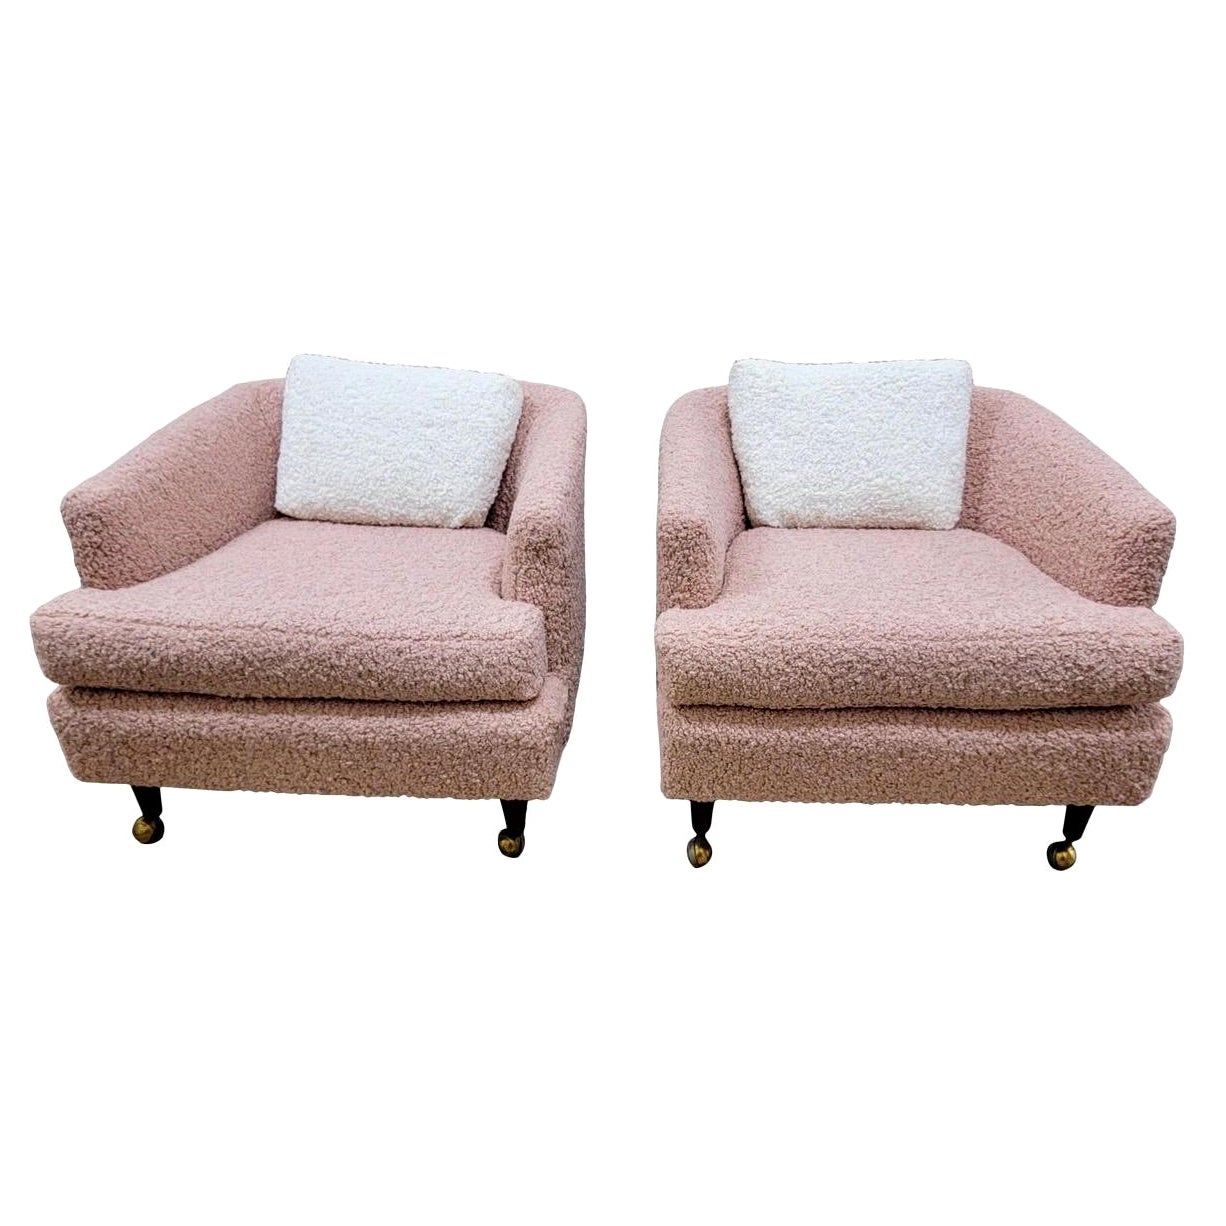 Pair of Mid-Century Drexel Blush Pink Boucle Chairs Newly Reupholstered